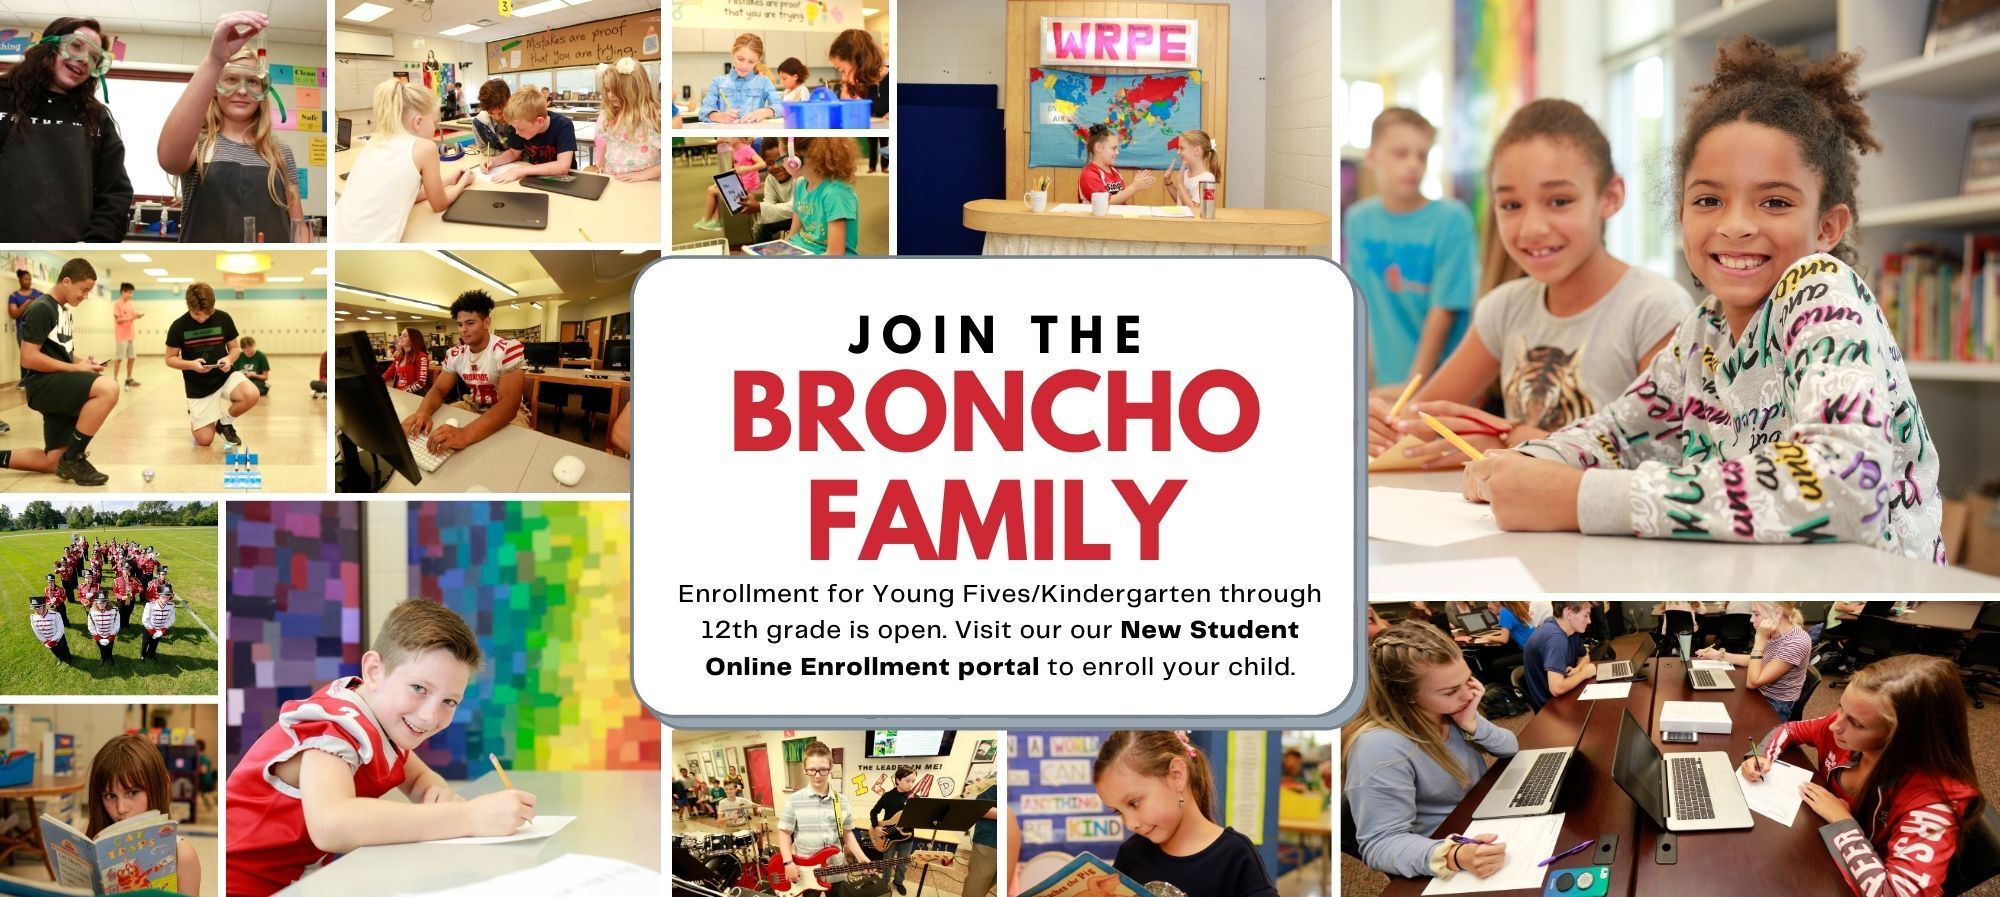 Join the broncho family - images of students